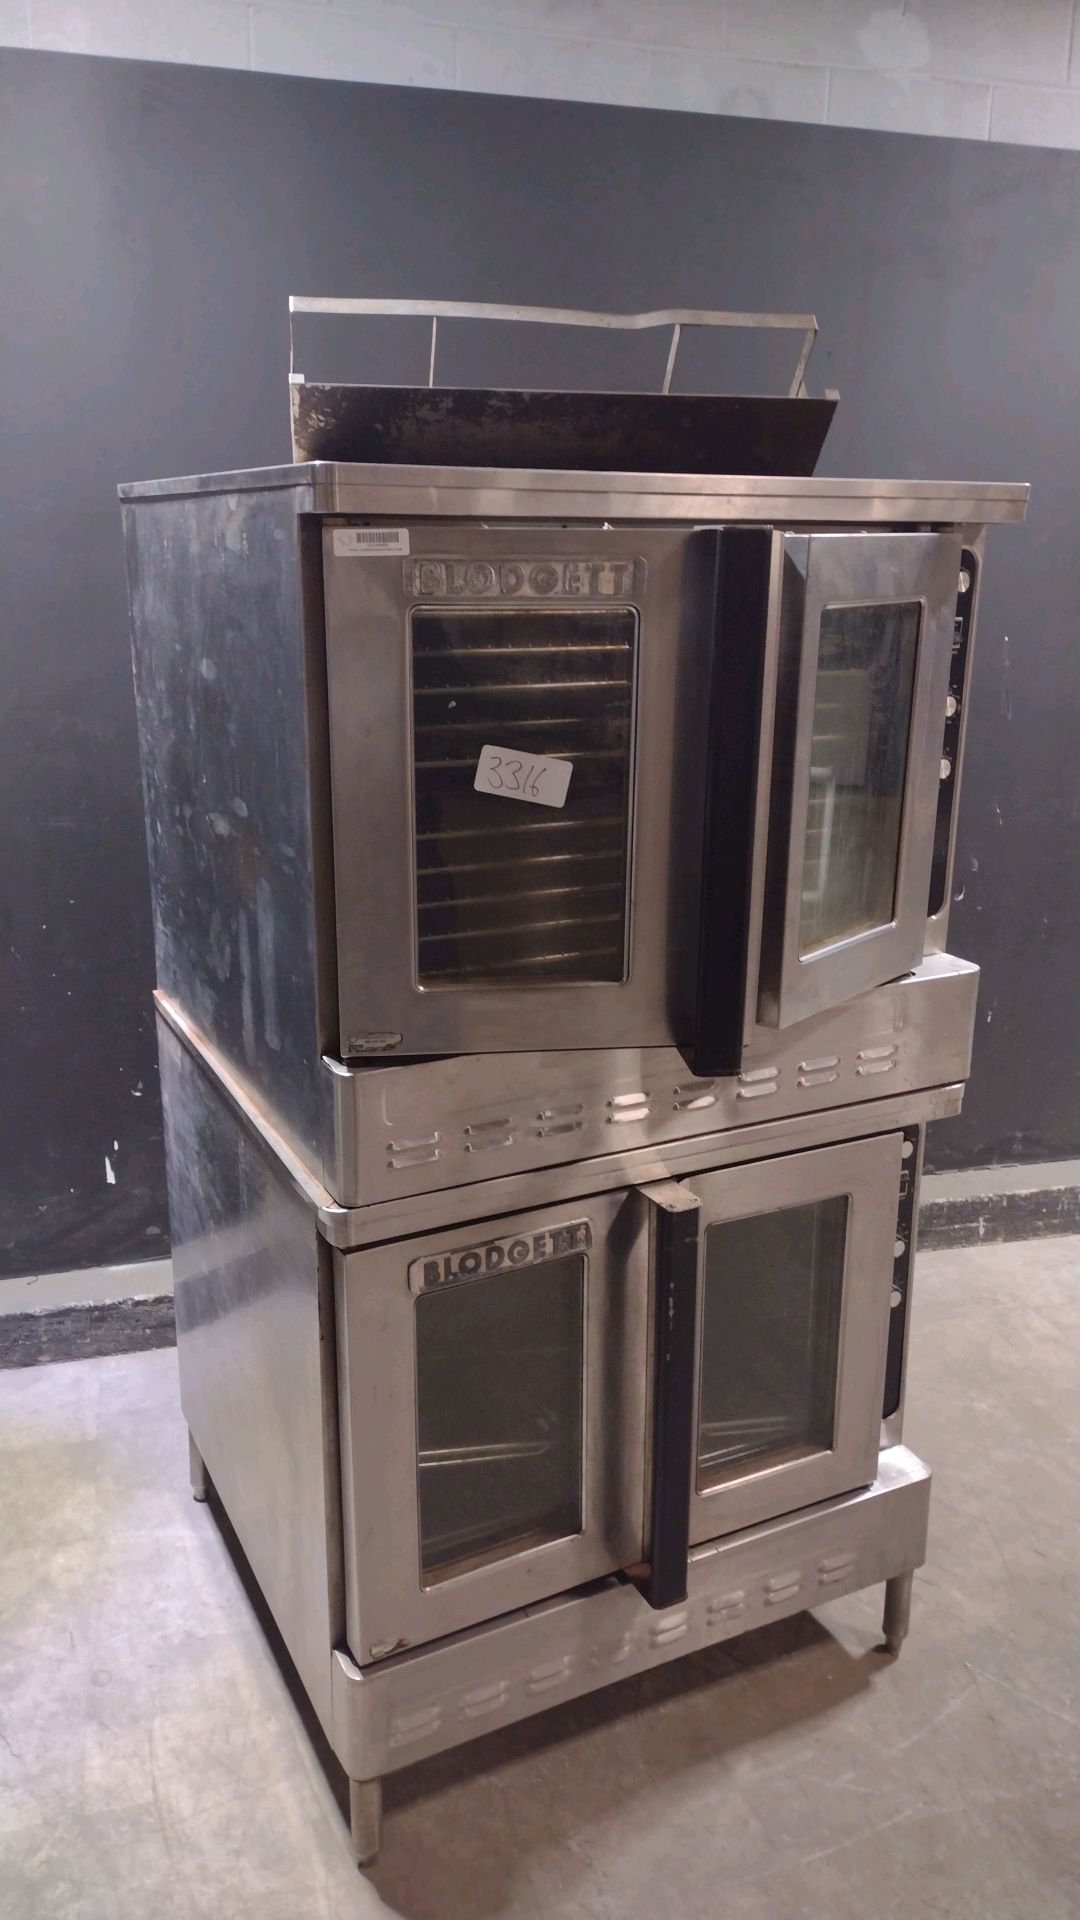 BLODGETT DOUBLE FULL SIZE CONVECTION OVEN (LOCATED AT 2440 GREENLEAF AVE, ELK GROVE VILLAGE, IL 600